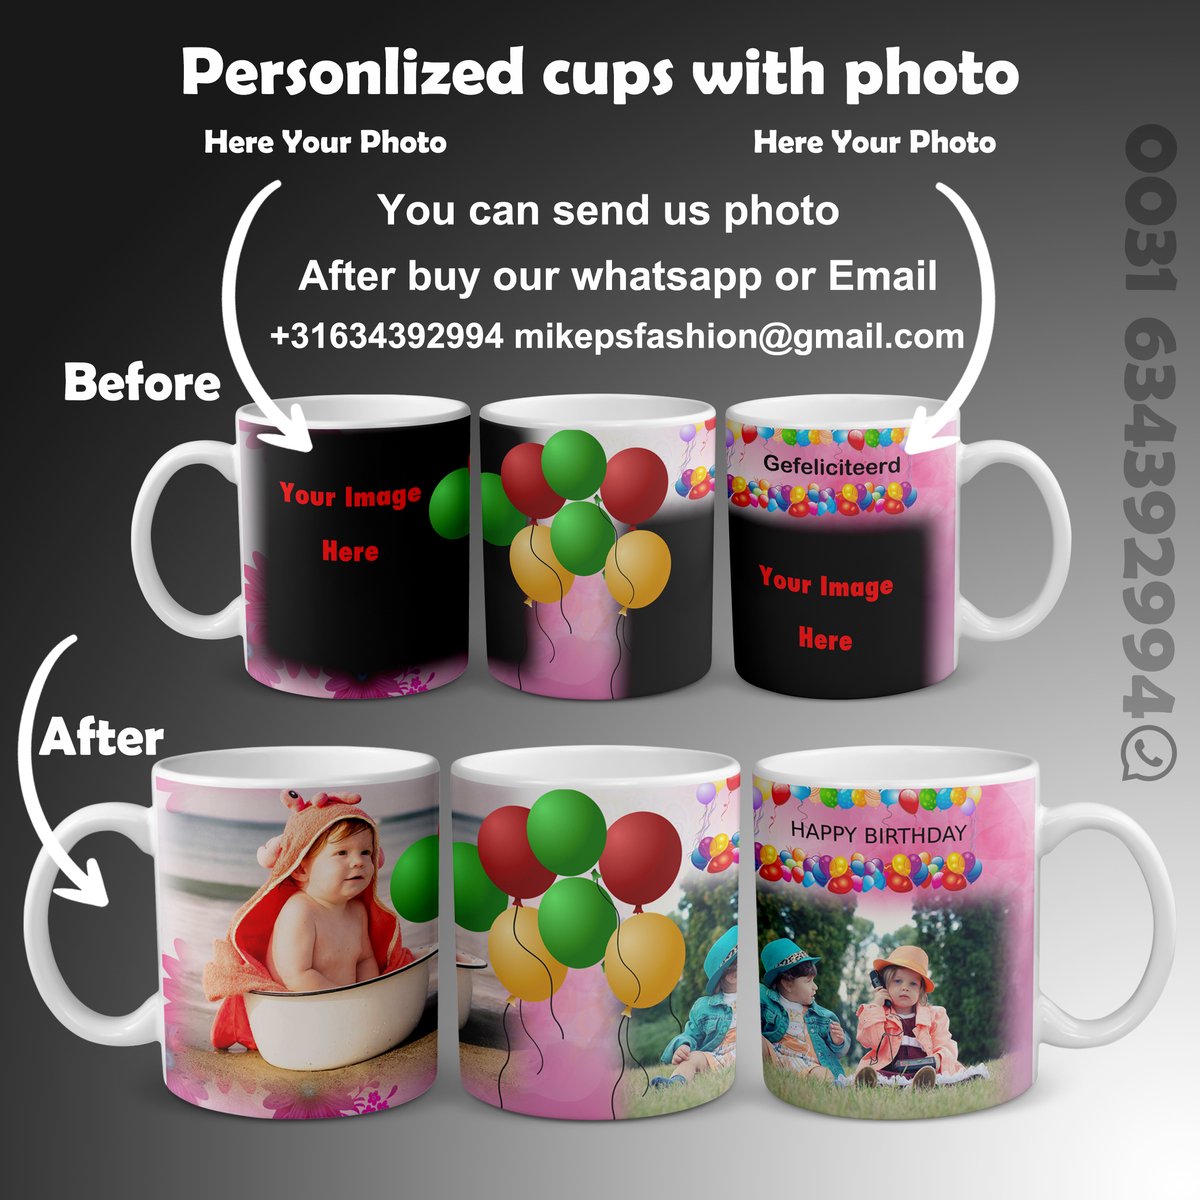 Personalized mug - Mug with Photo - Happy birthday mug - Birthday gift - Gift for Kids - Gift for wife - Gift for her - Gift for him - Funny gift - Tea glasses - Valentine gifts - Coffee cups